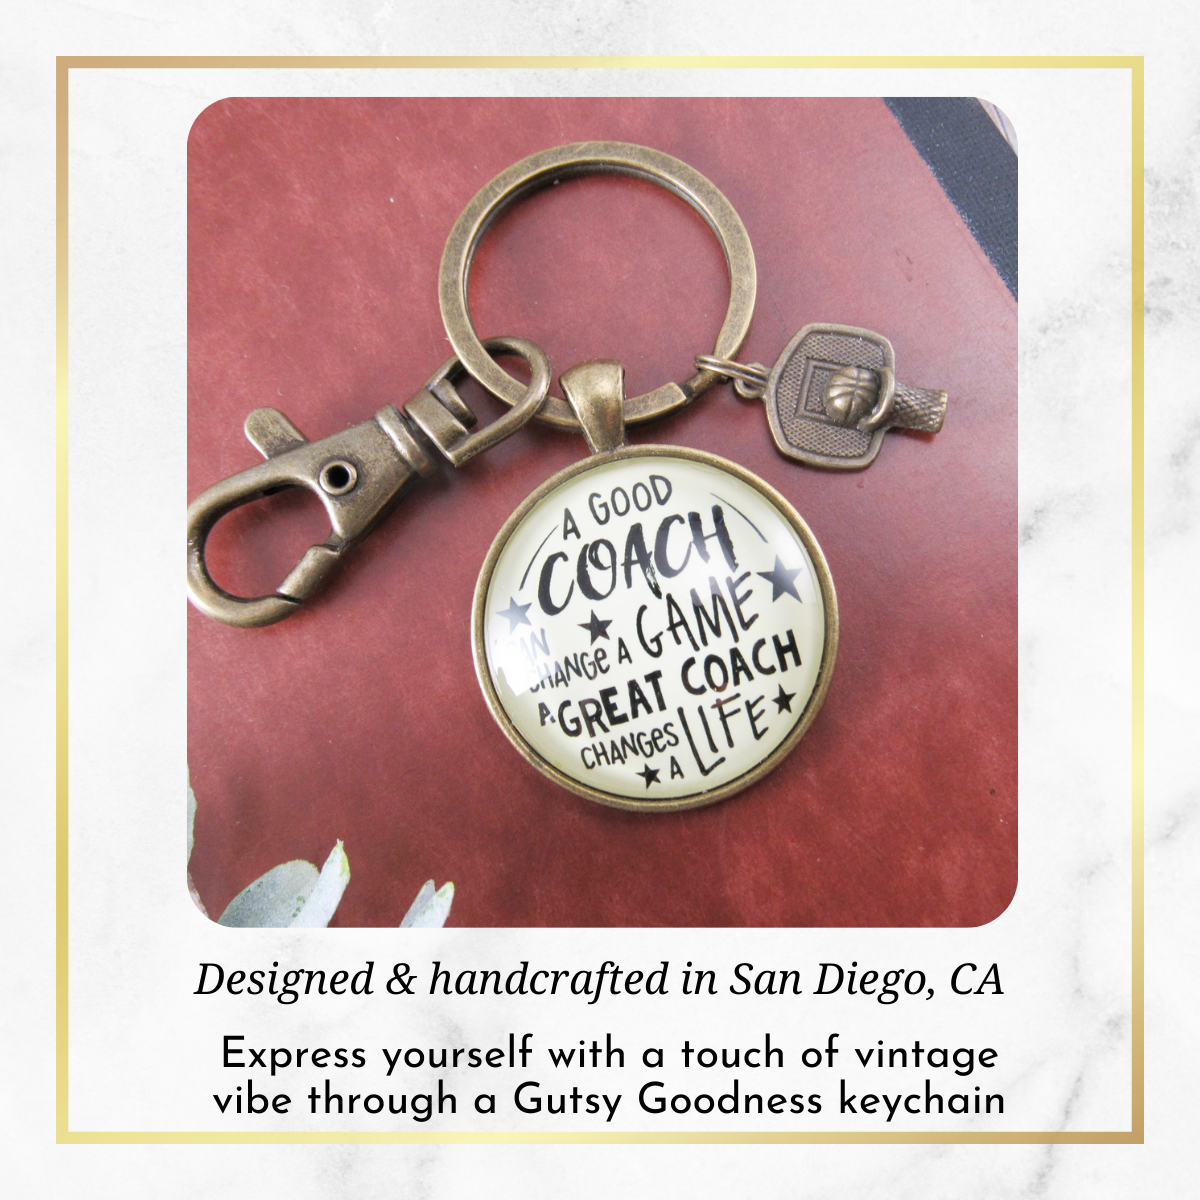 Basketball Coaching Sport Keychain Great Coach Changes Life Thank You Gift - Gutsy Goodness Handmade Jewelry;Basketball Coaching Sport Keychain Great Coach Changes Life Thank You Gift - Gutsy Goodness Handmade Jewelry Gifts